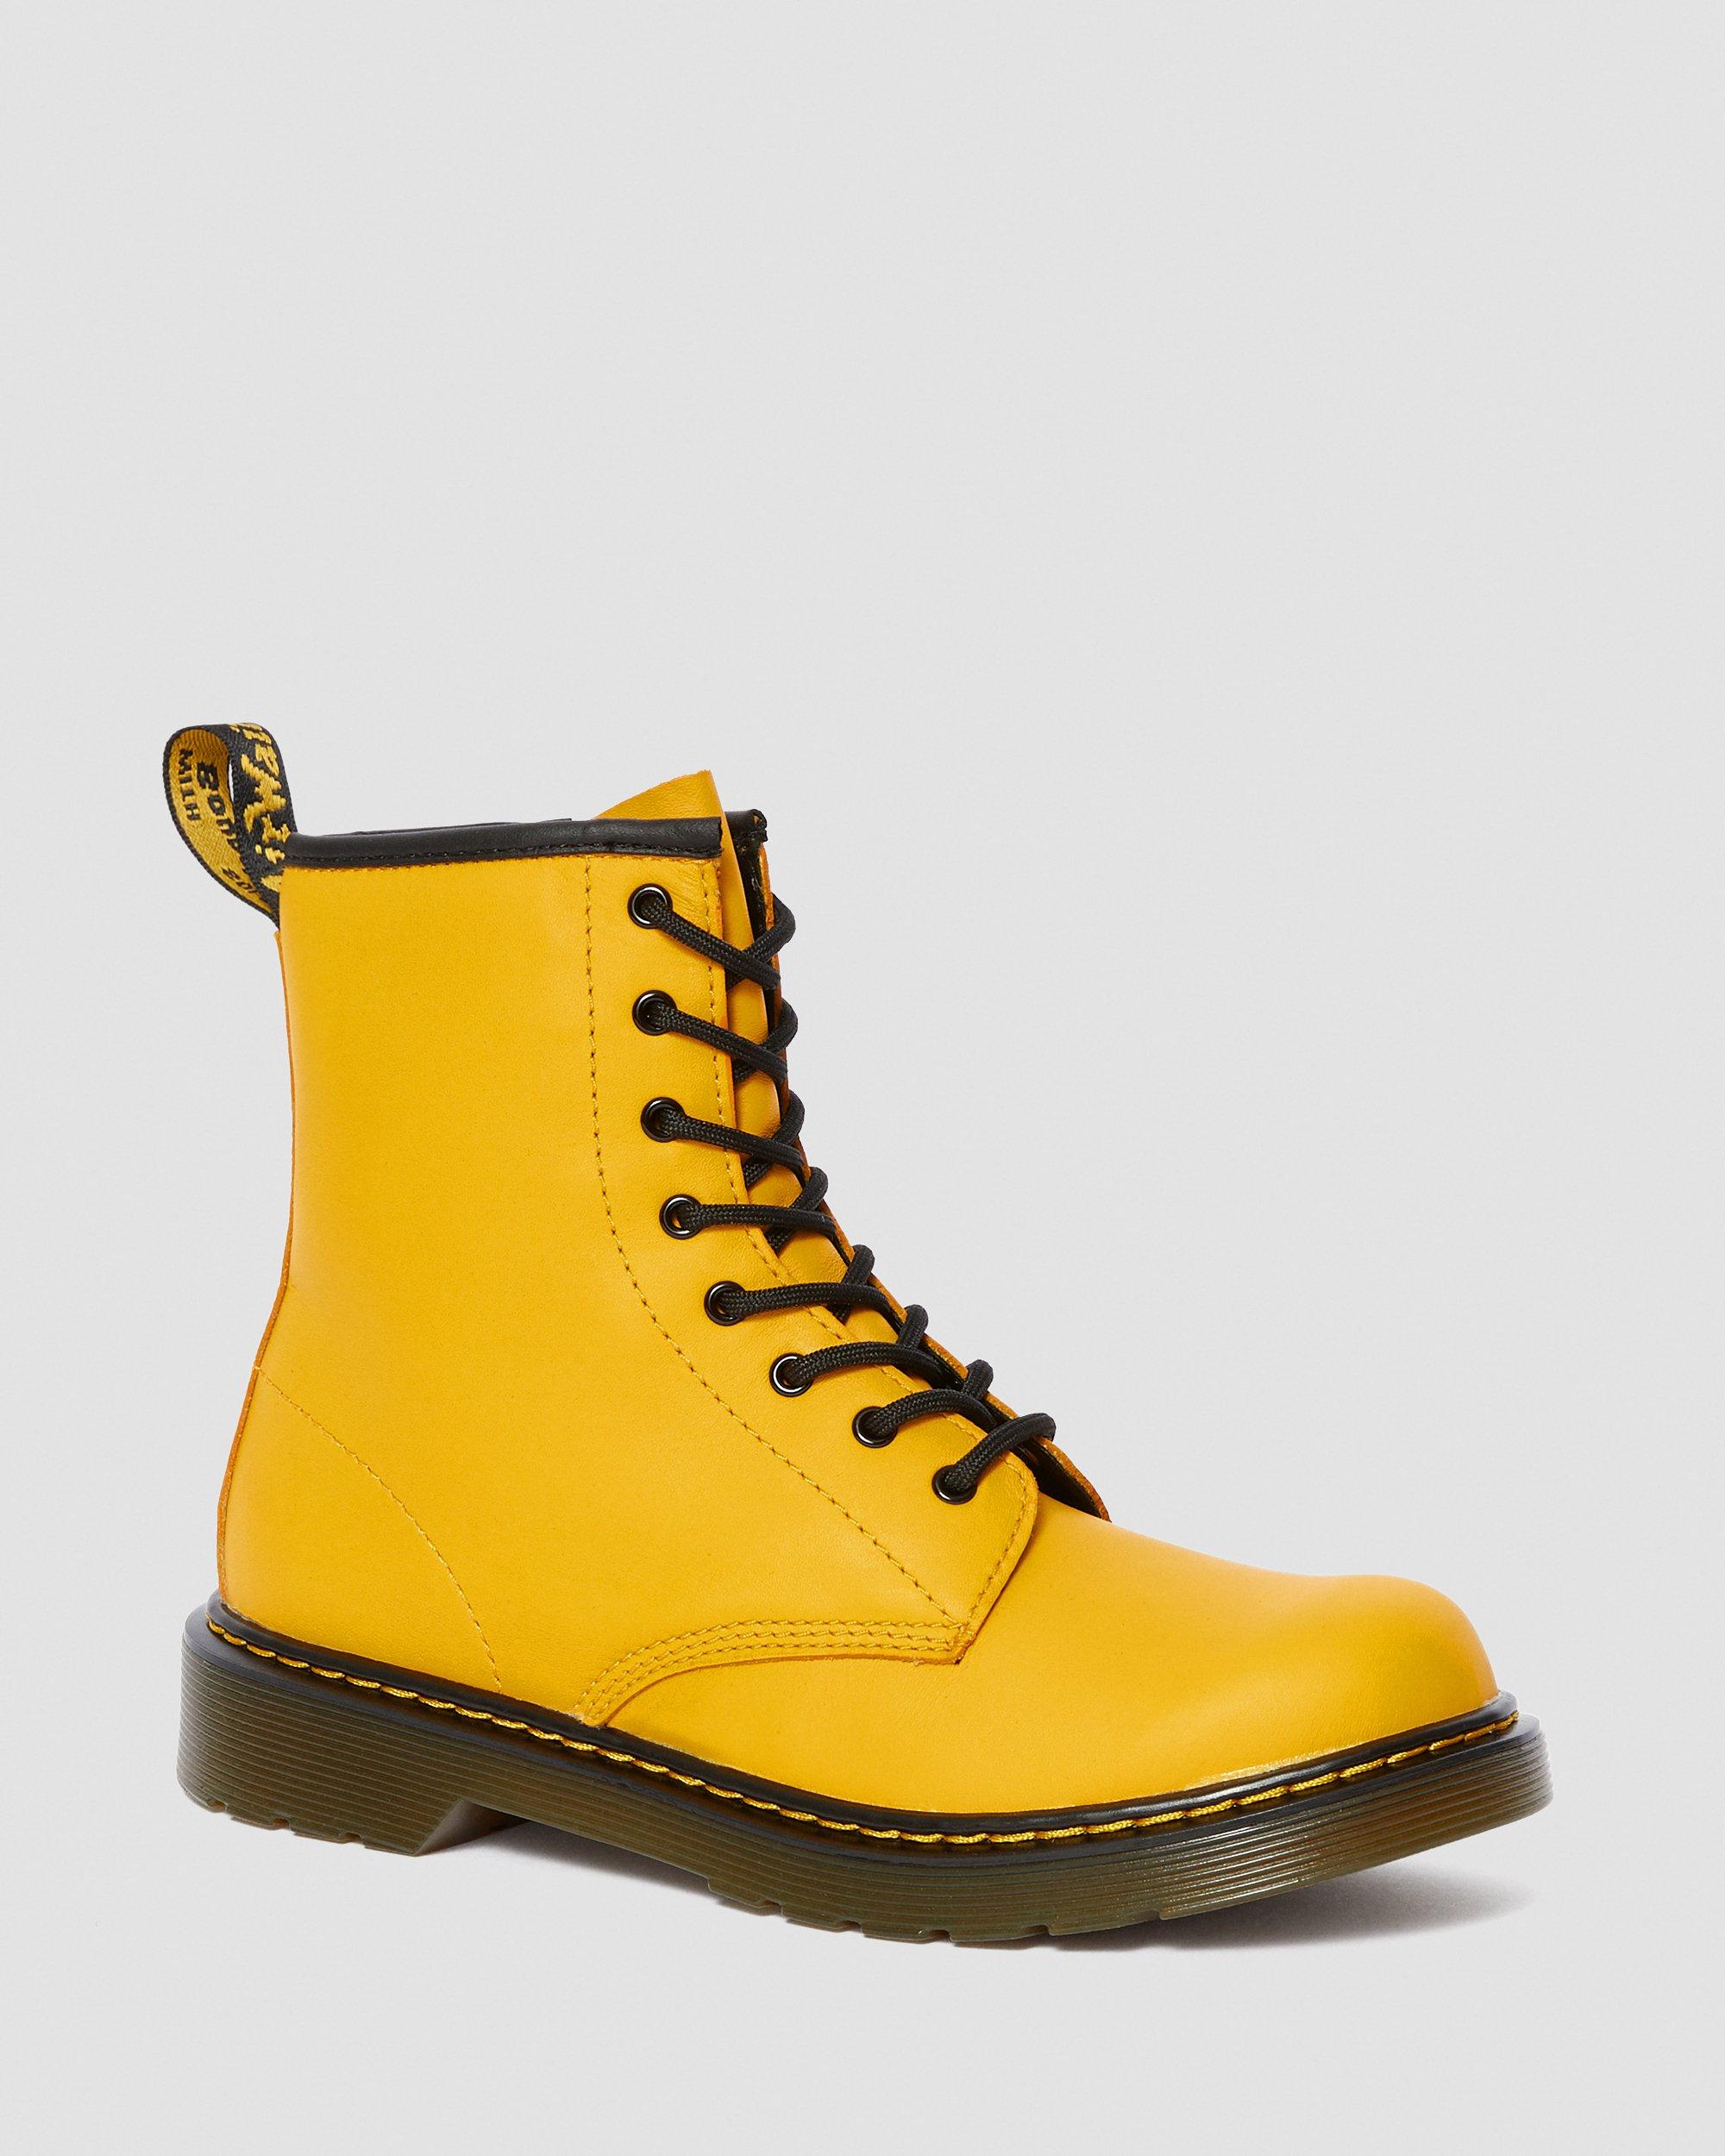 Youth 1460 Leather Lace Up Boots in Yellow